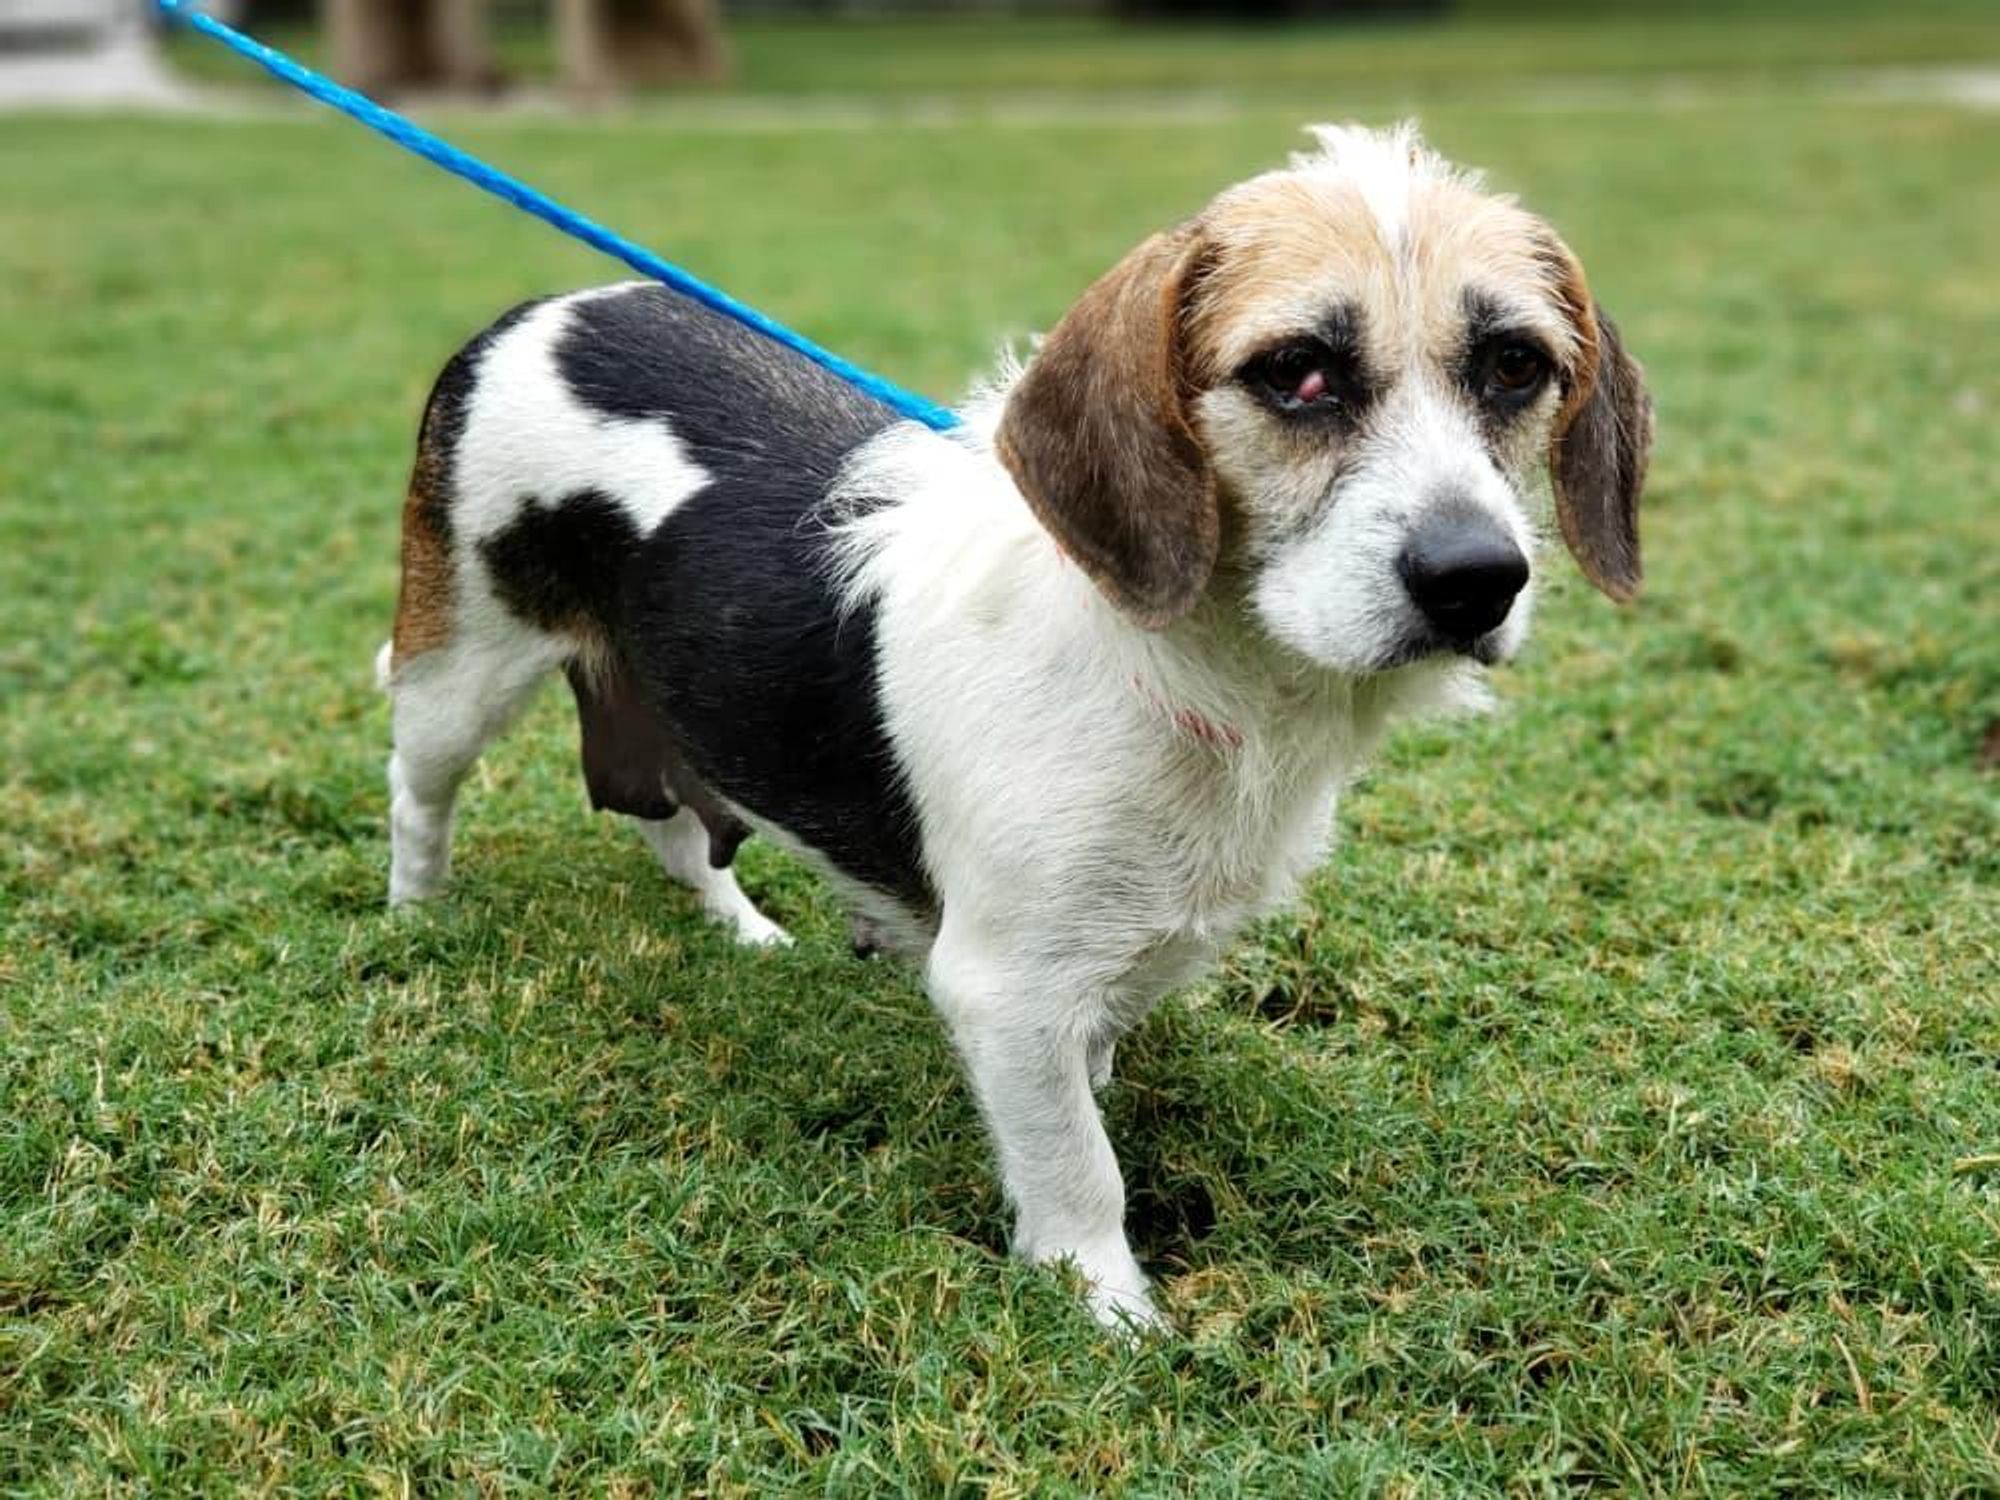 Pet of the week - Lucy beagle mix